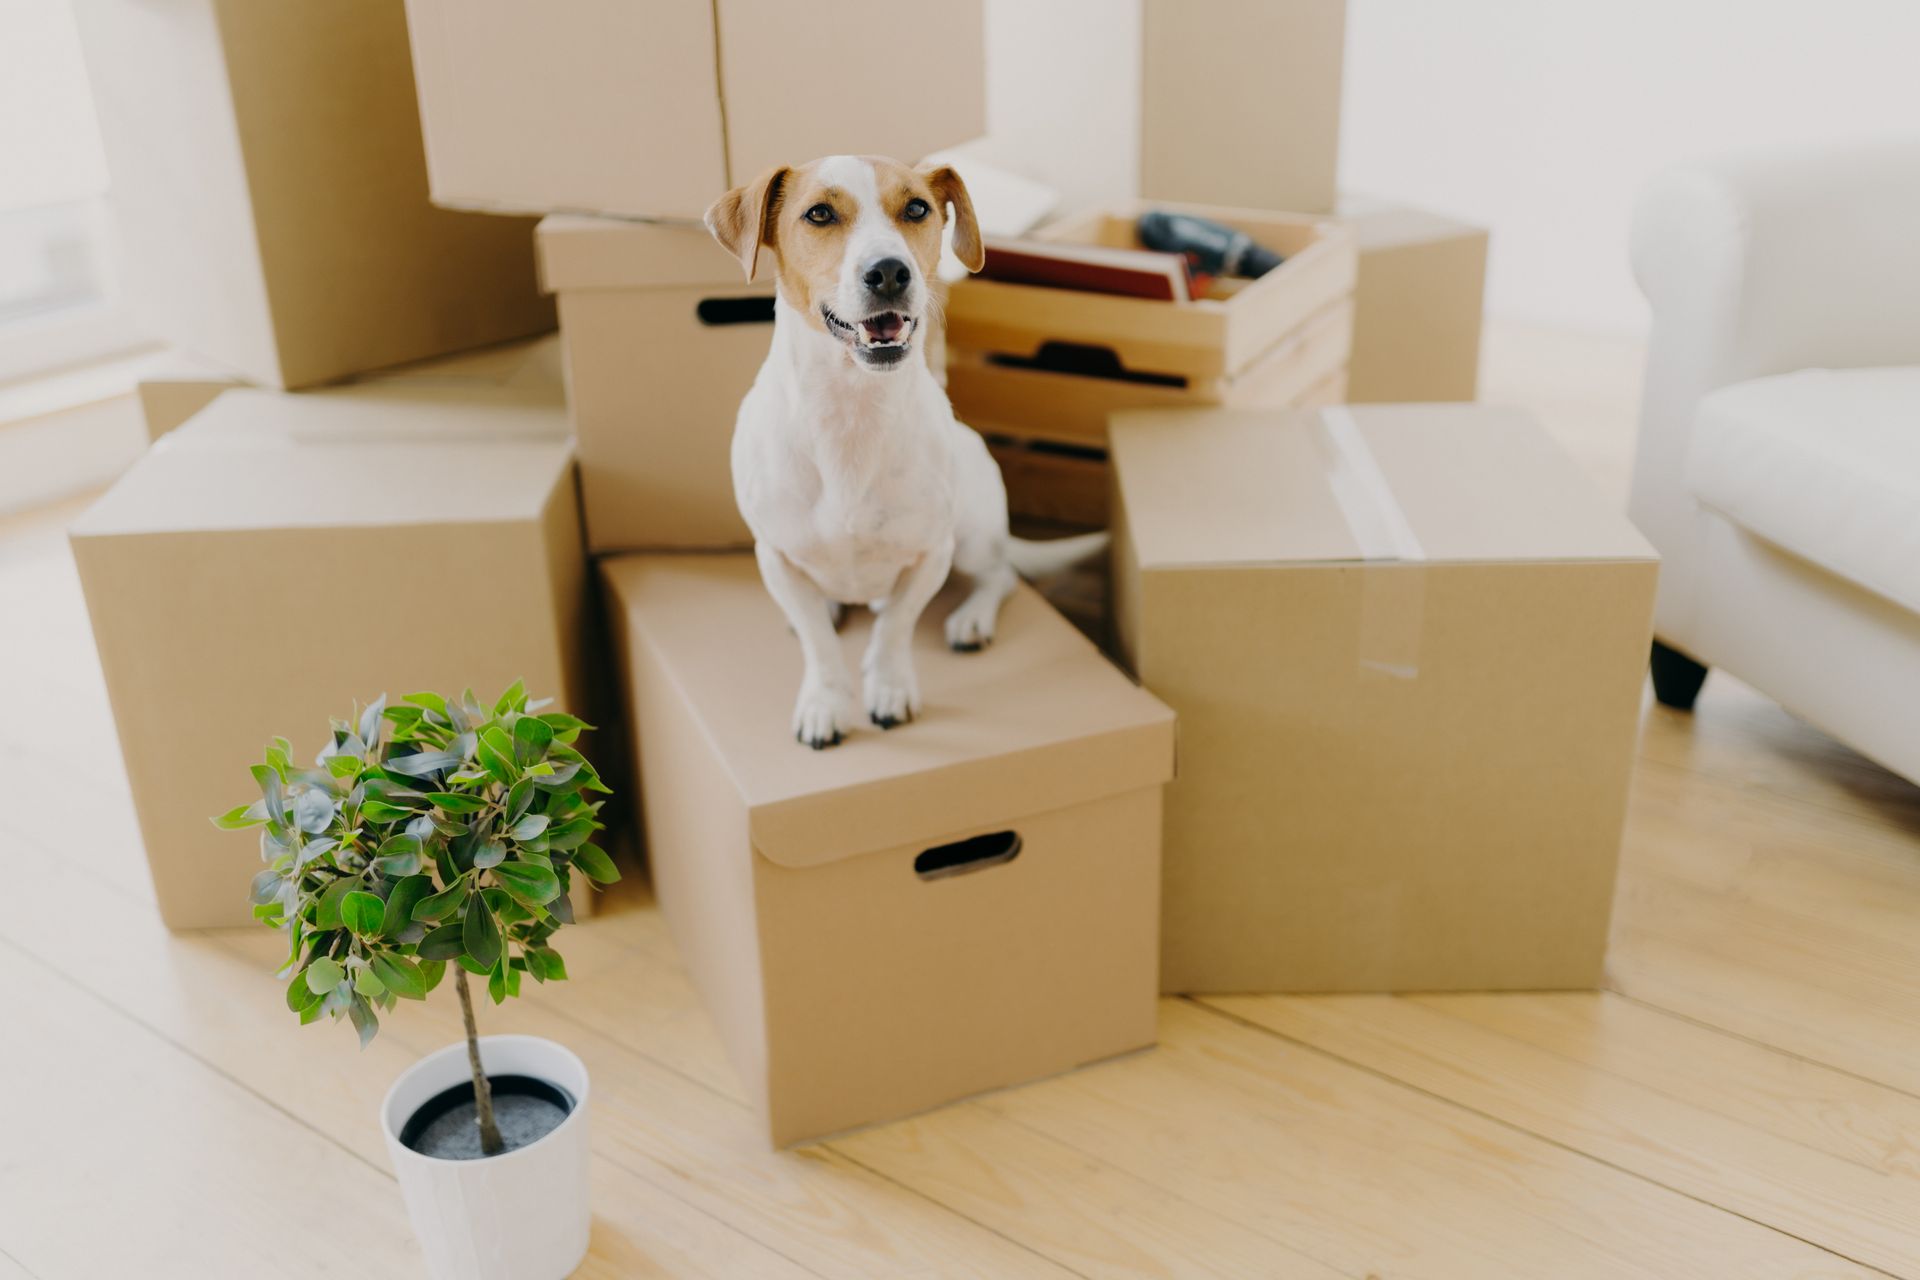 A puppy and a plant sitting next to moving boxes